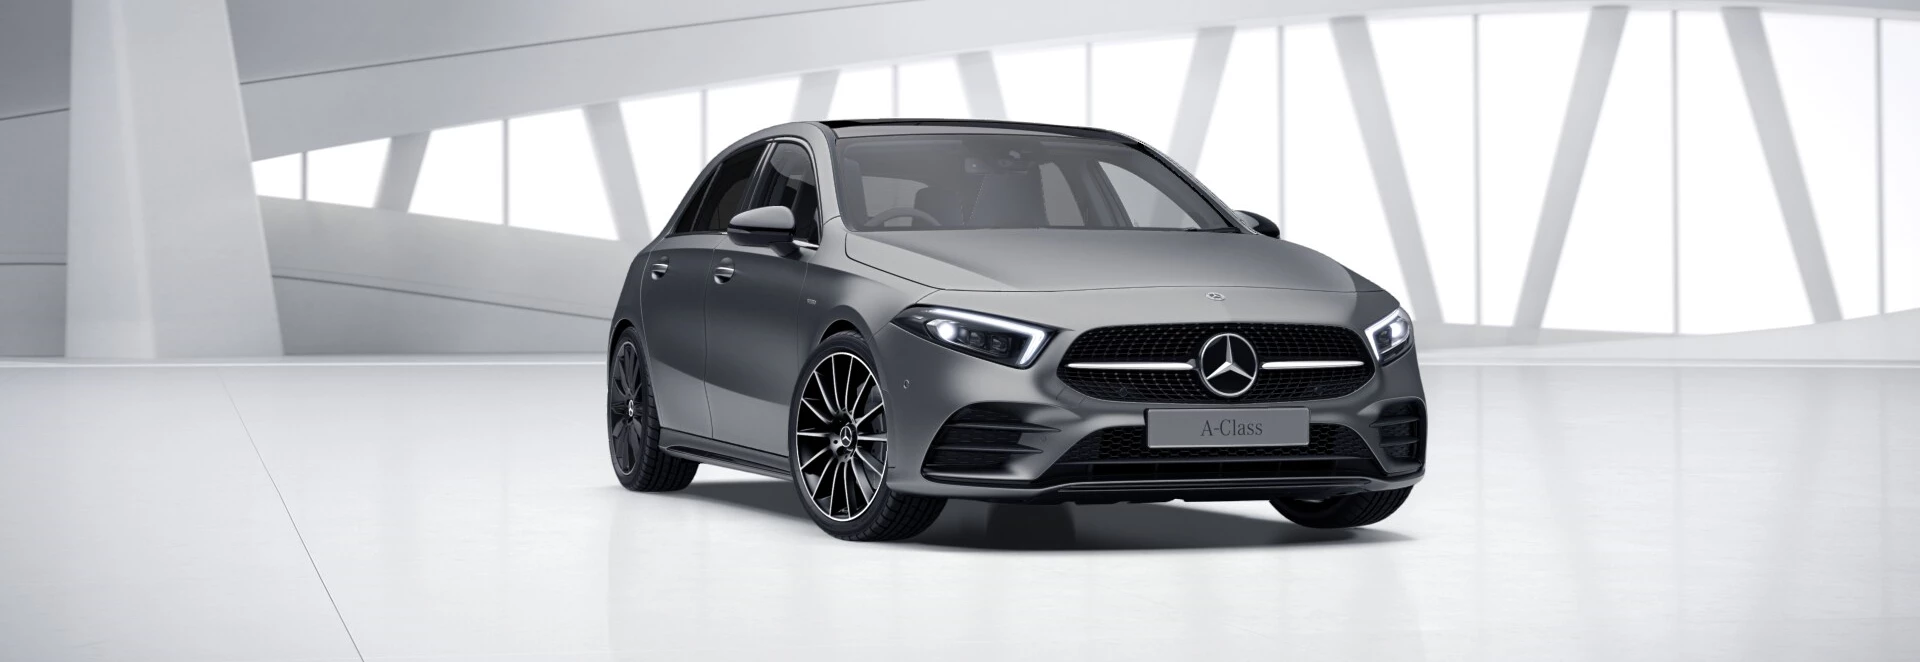 Mercedes expands A-Class range with new ‘Exclusive Edition’ 